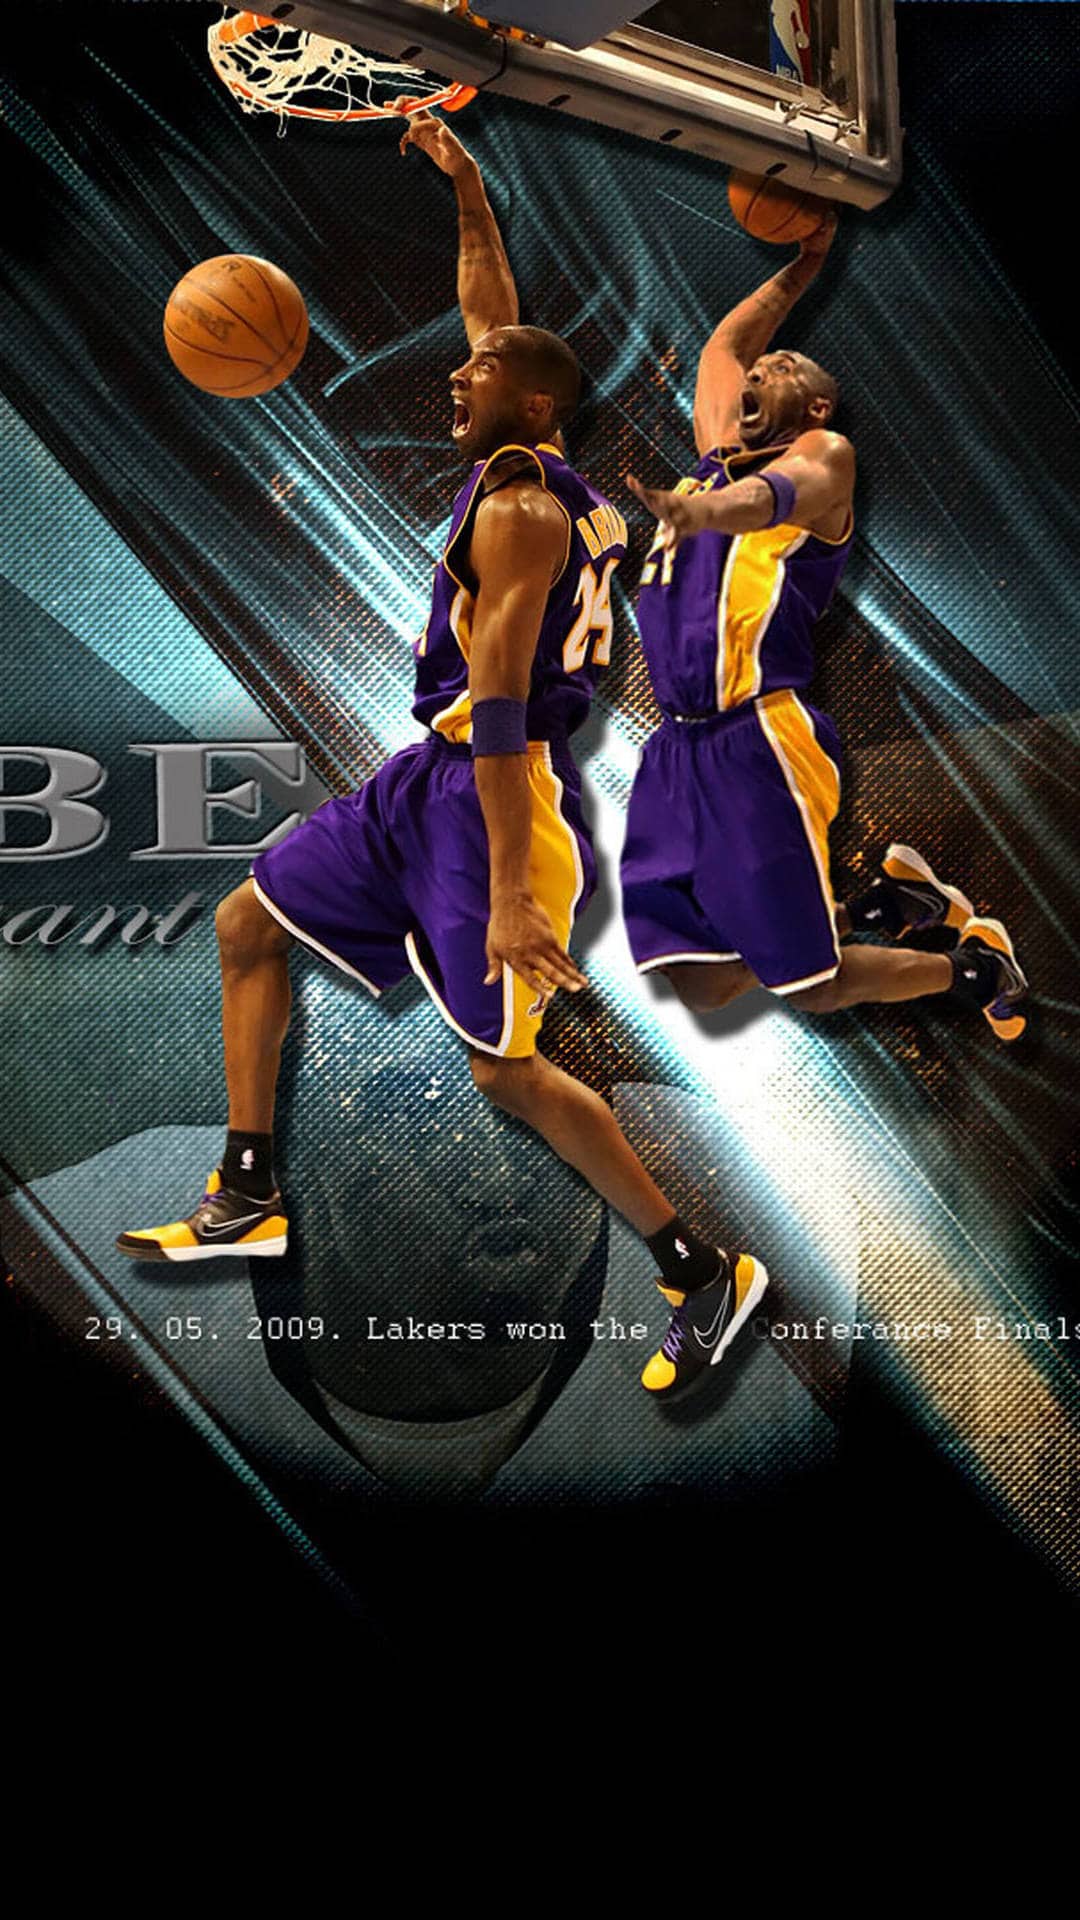 30+ Kobe Bryant Wallpapers HD for iPhone 2016 - Apple Lives